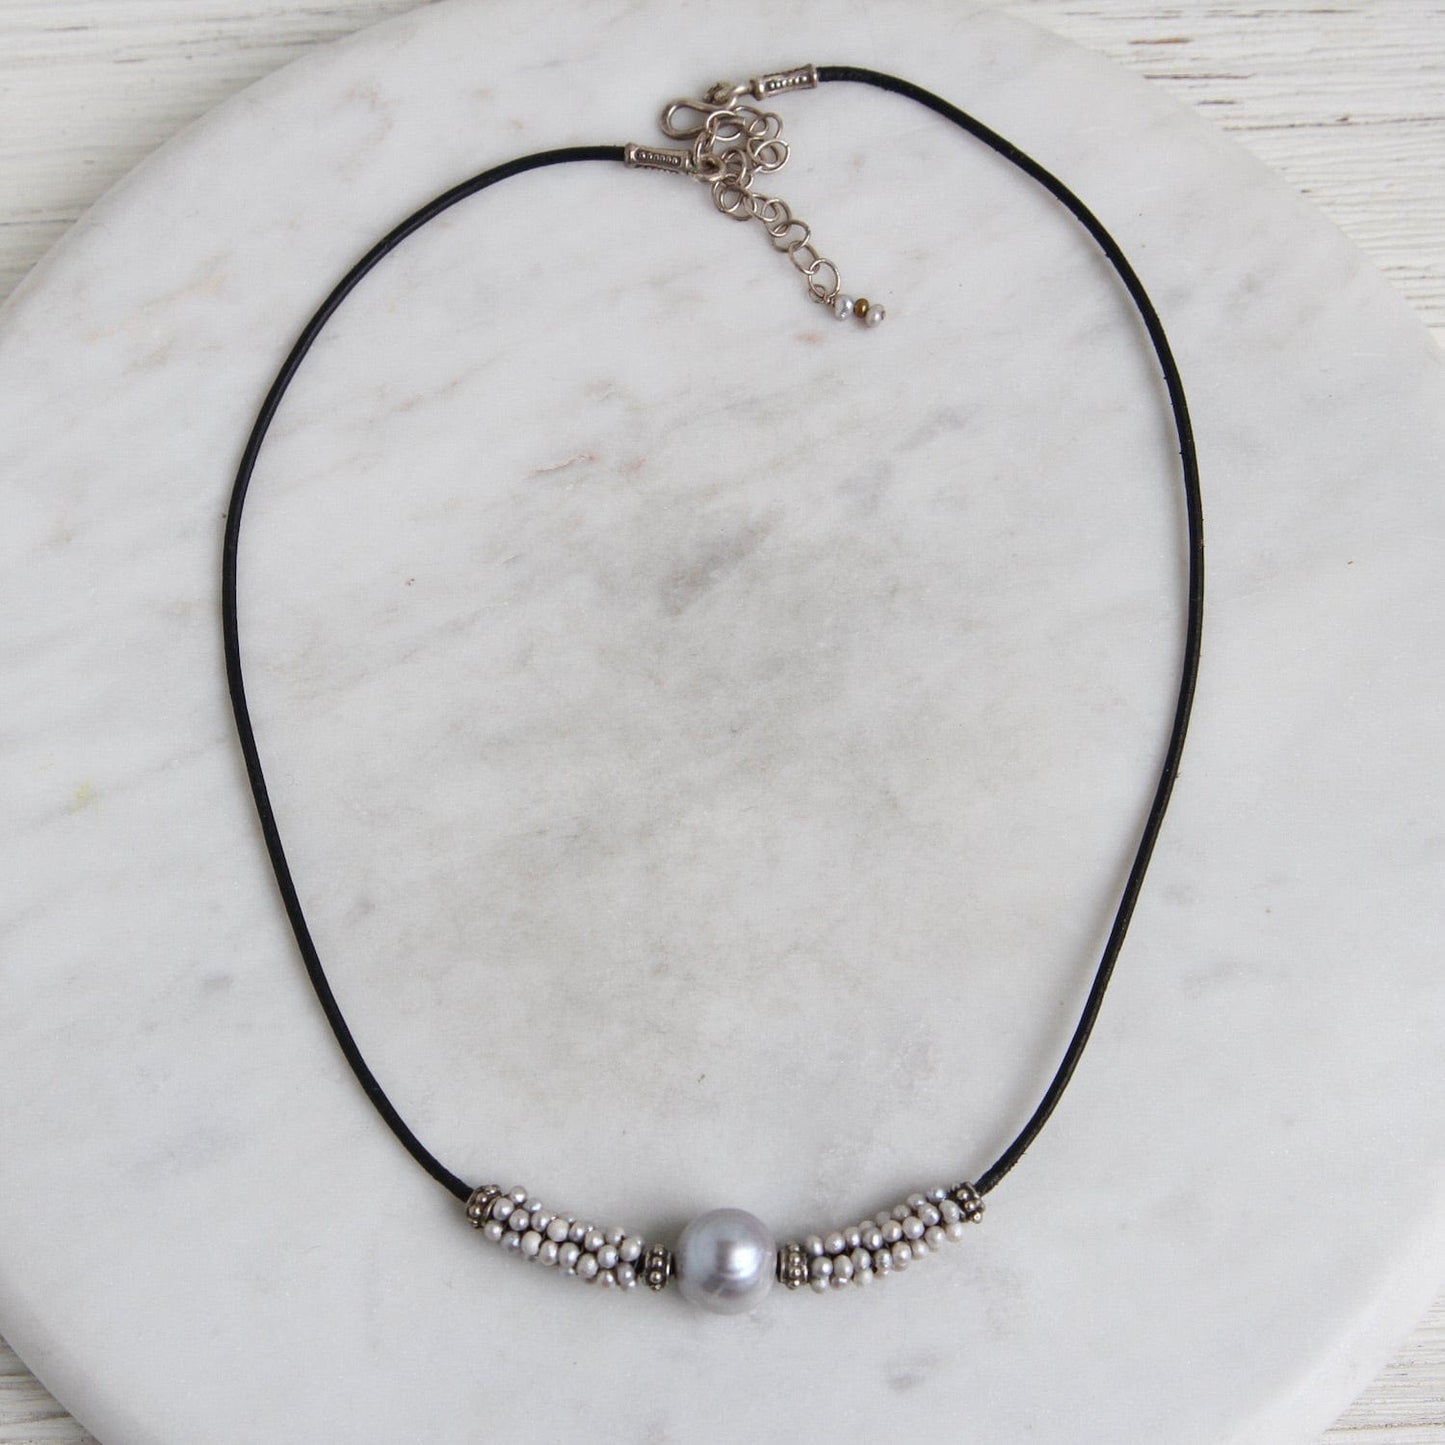 NKL-JM Hand Stitched Grey Pearl Leather Necklace